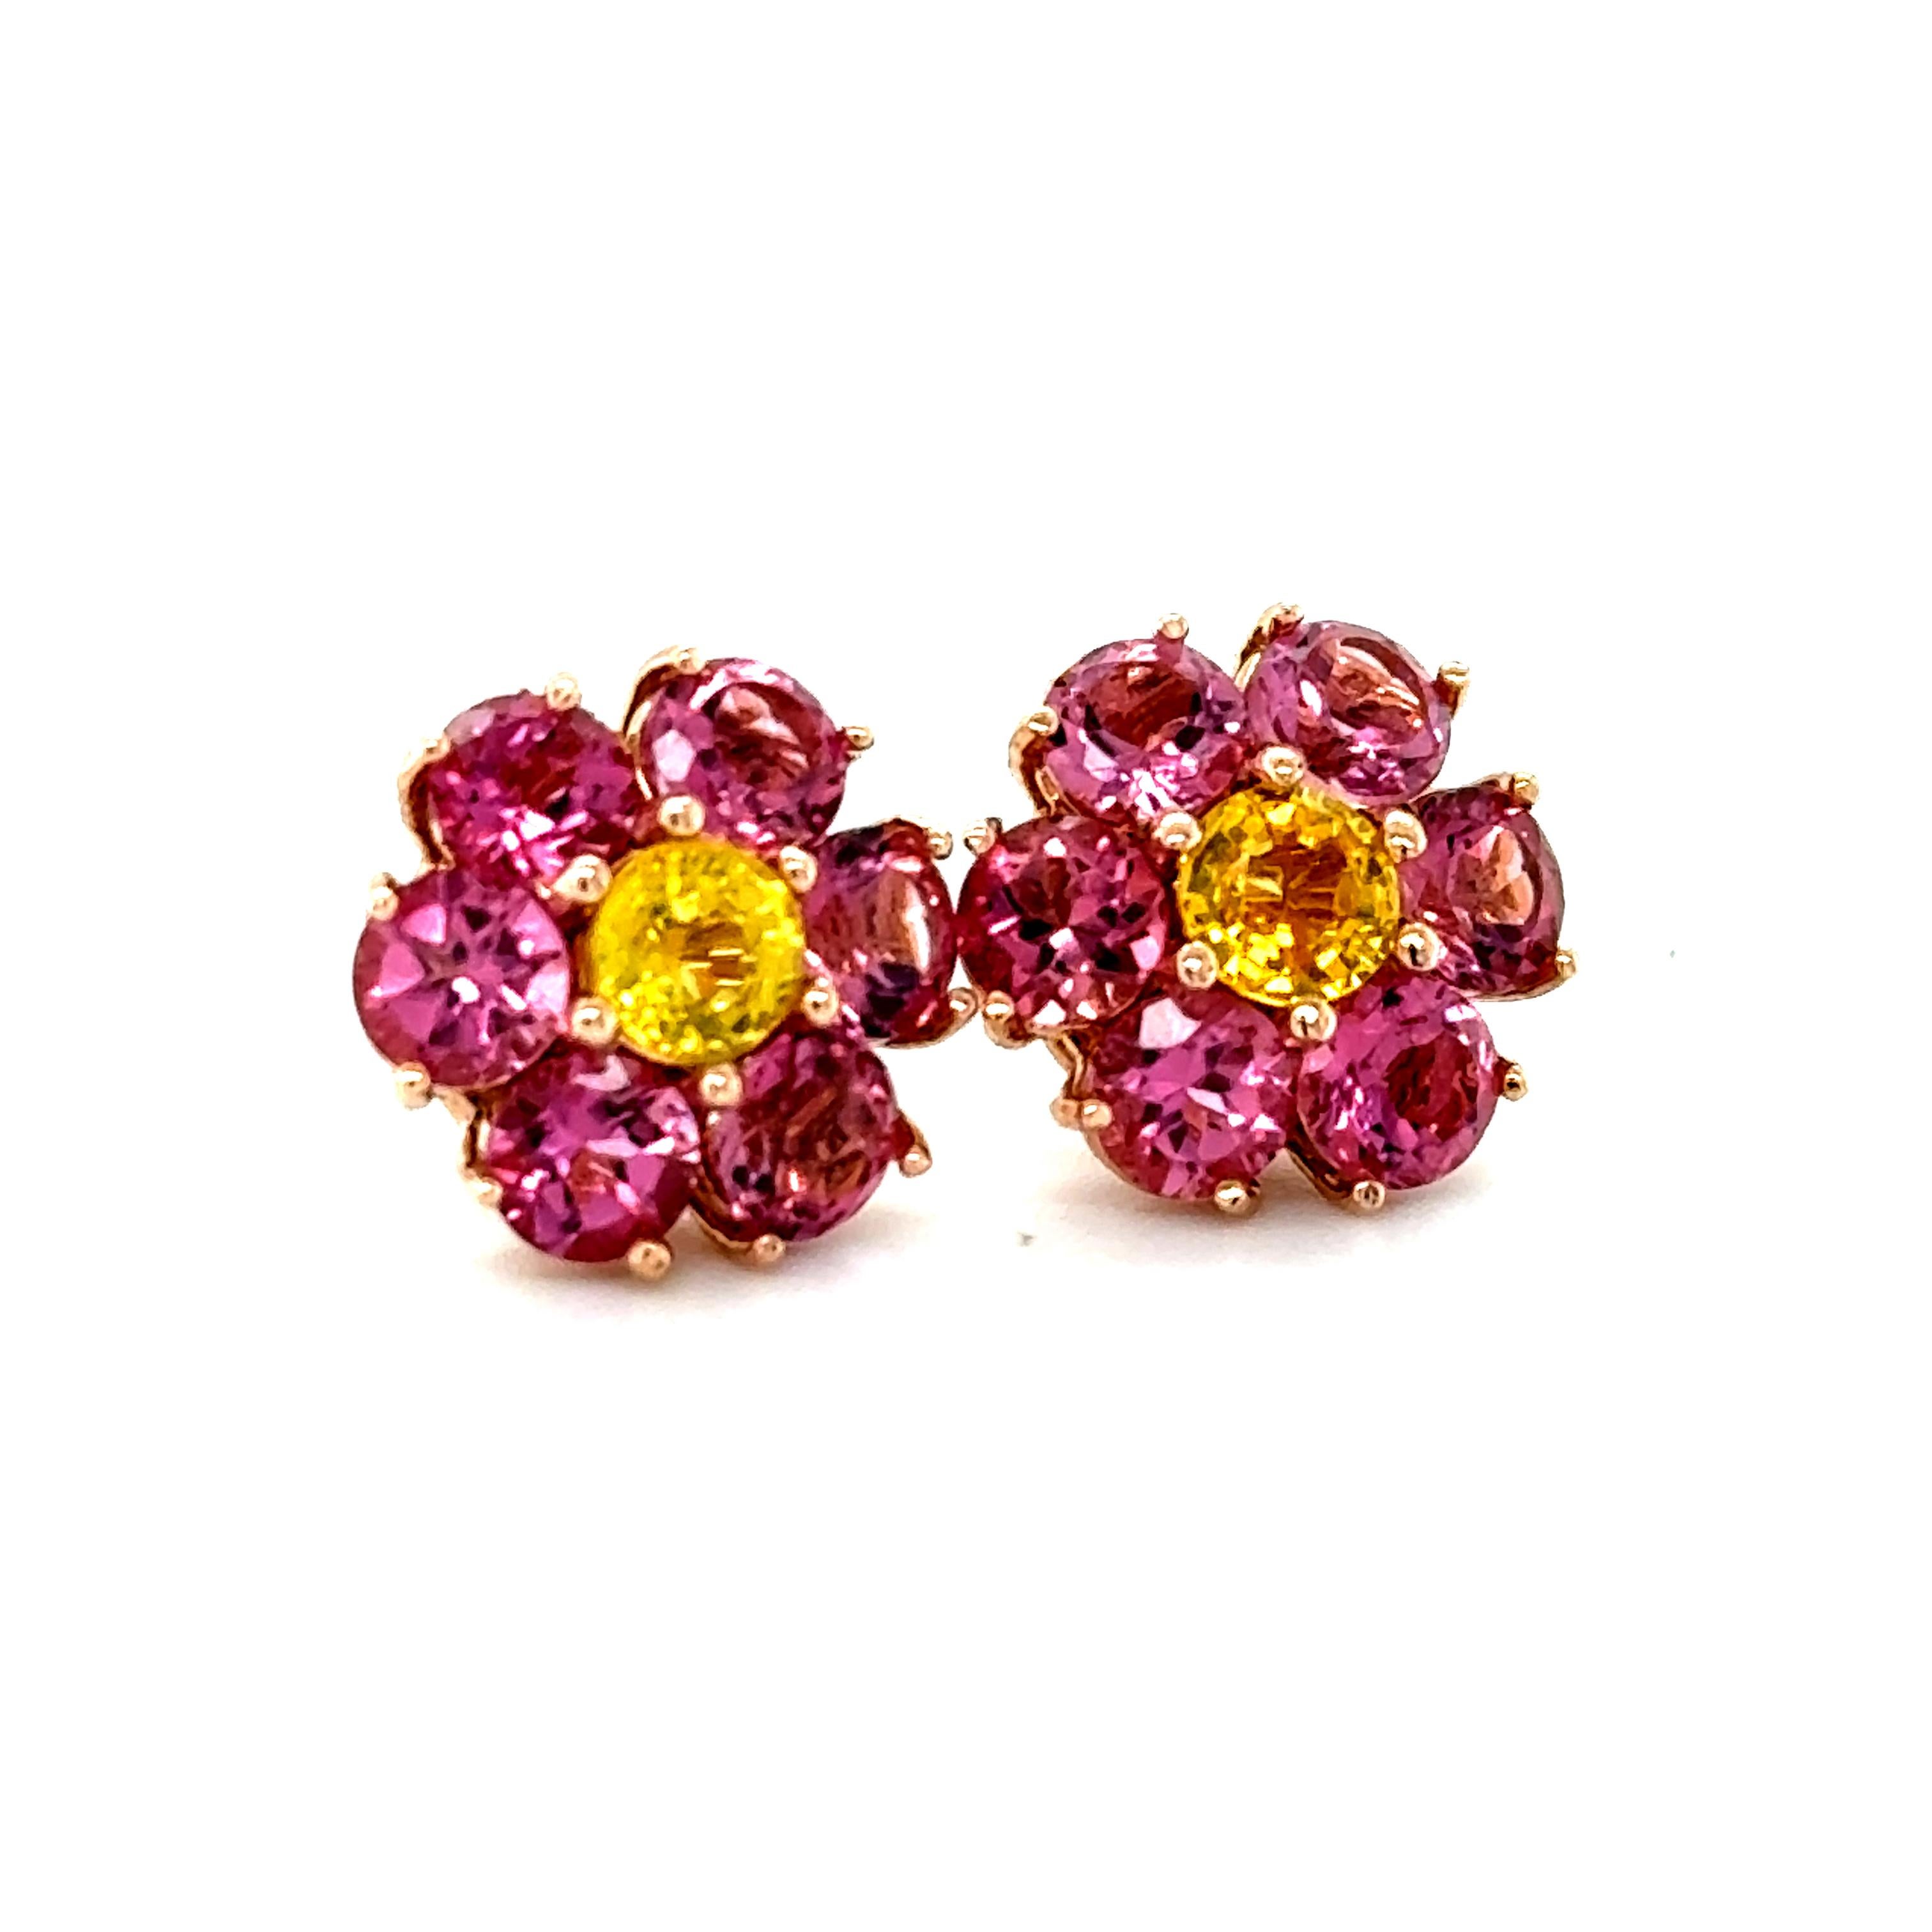 Cute, dainty earrings that are versatile and great for an everyday look! 
3.65 Carat Natural Pink Tourmaline Sapphire Rose Gold Stud Earrings

There are 12 Pink Tourmalines (2.88 carats) and 2 Yellow Sapphires (0.77 carats) set to create a Flower